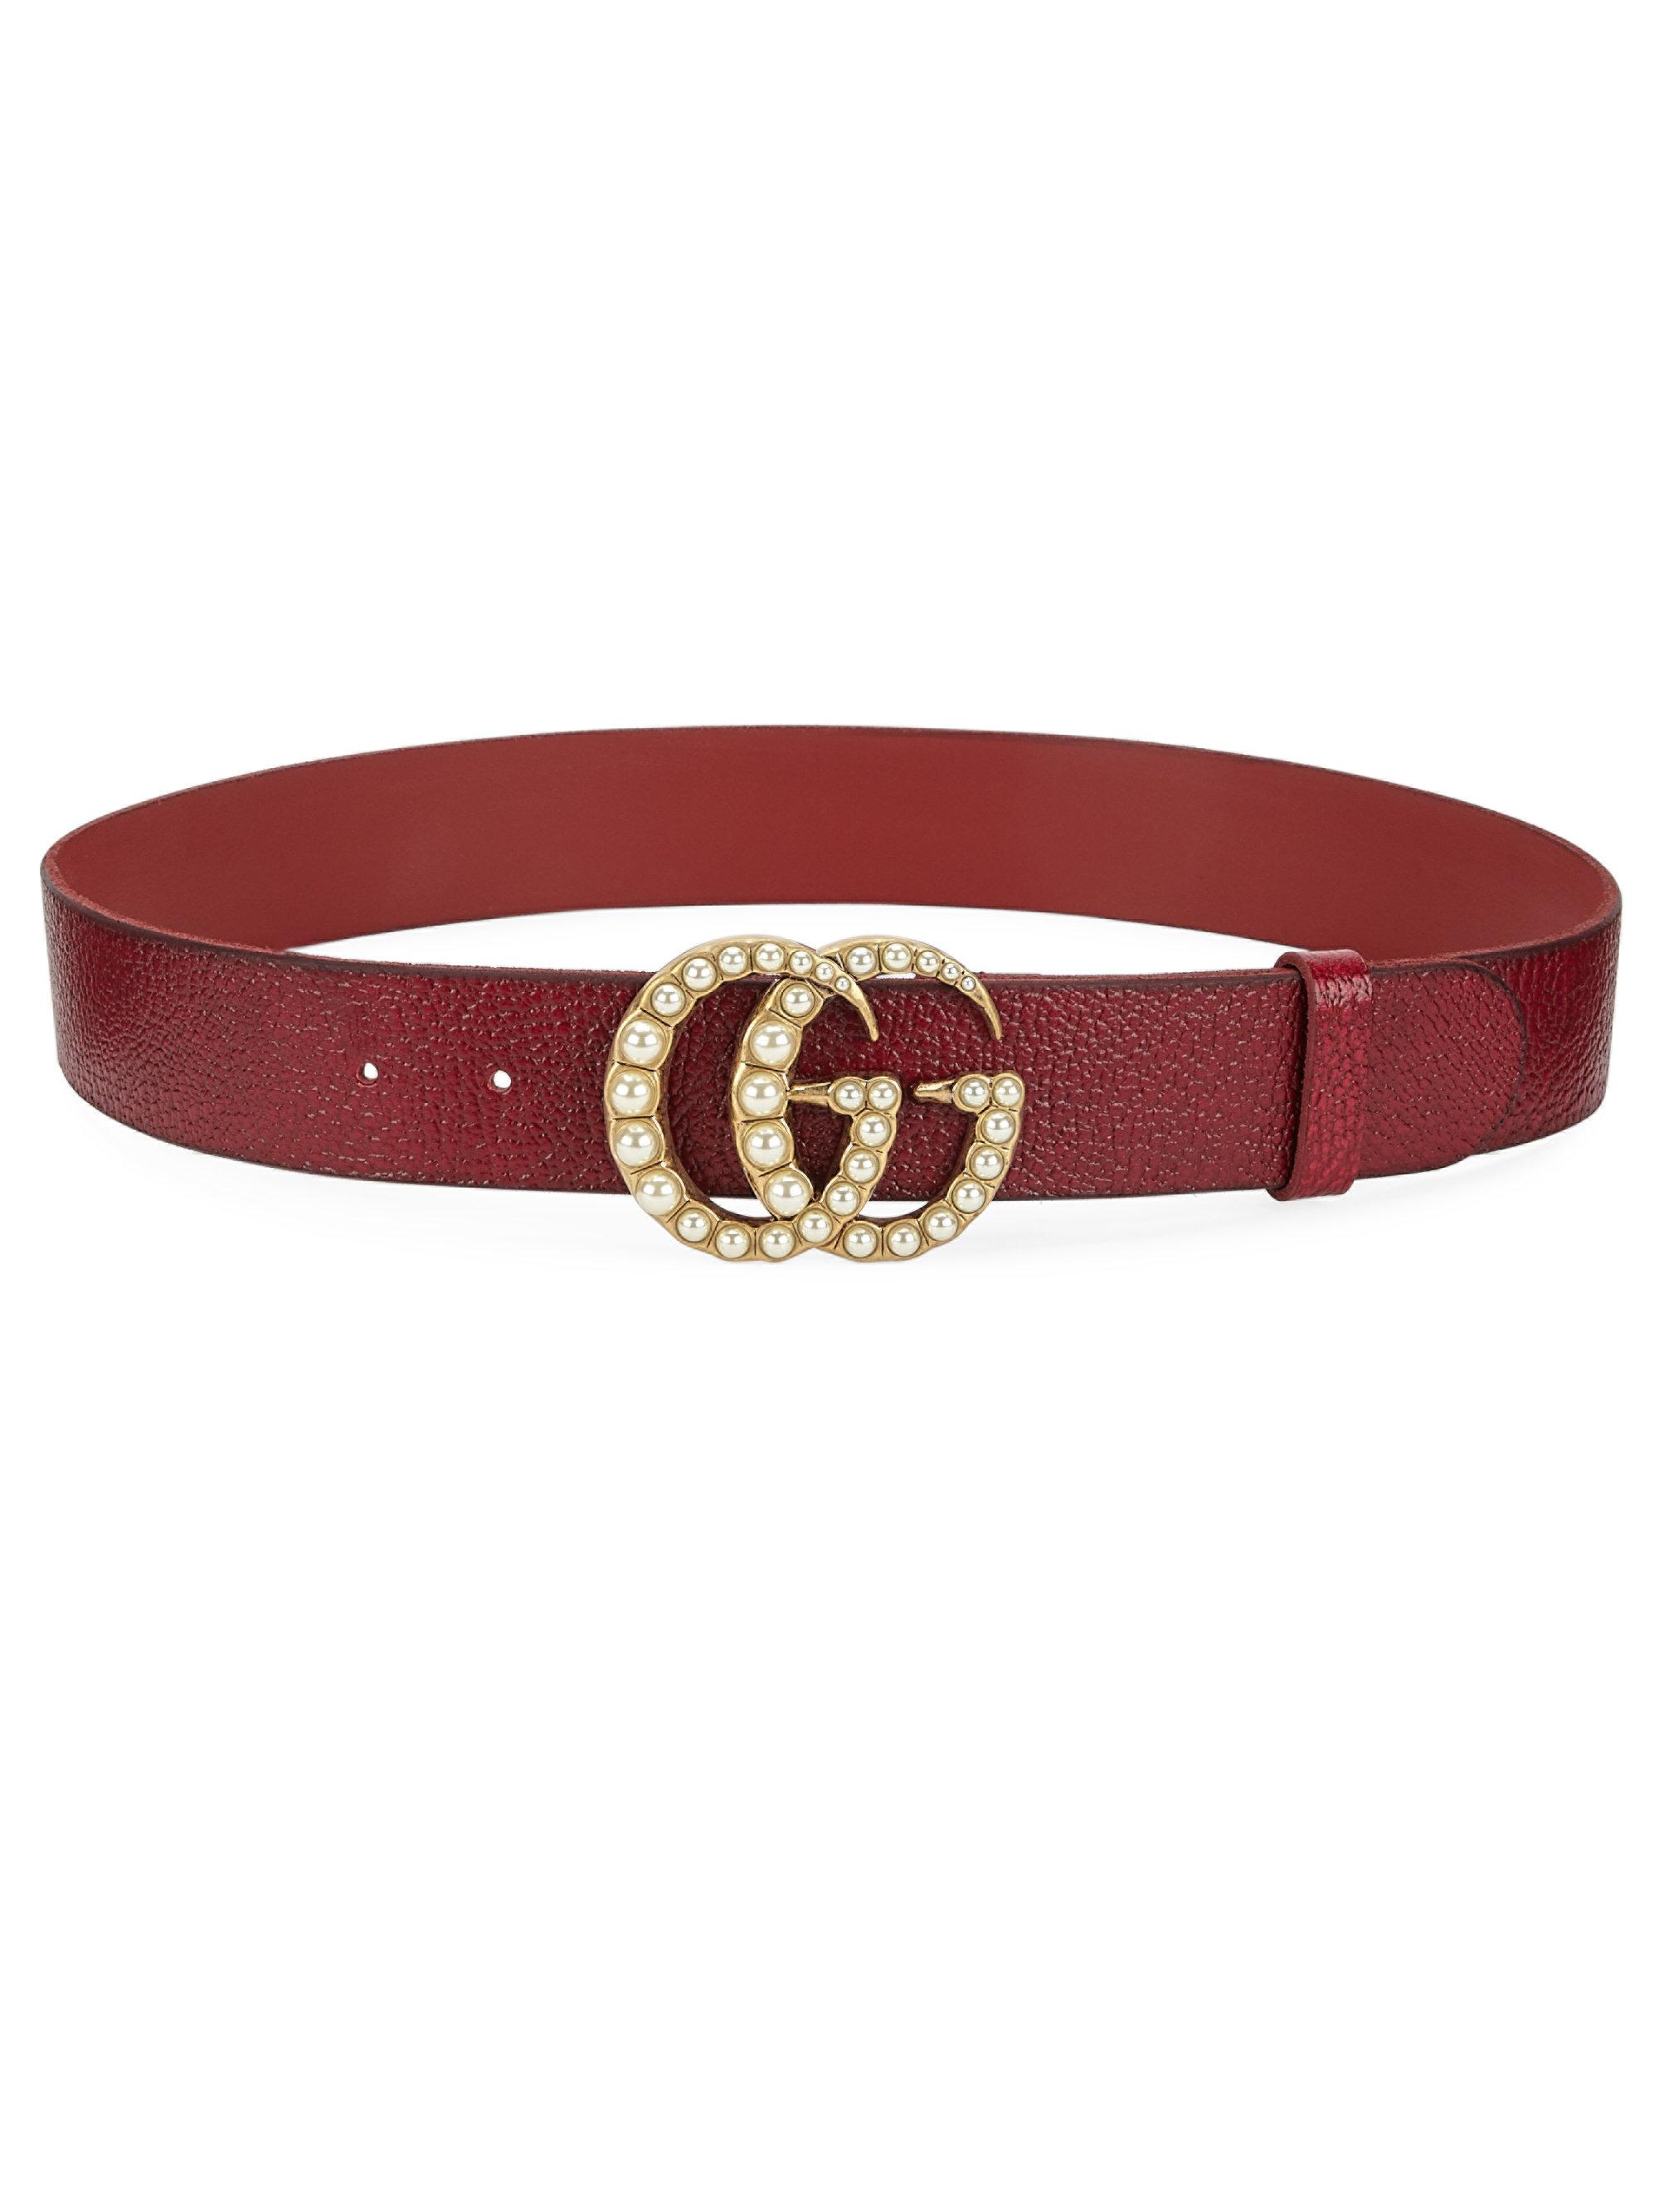 Gucci Red Leather Torchon Chain GG Buckle Belt 95CM Gucci